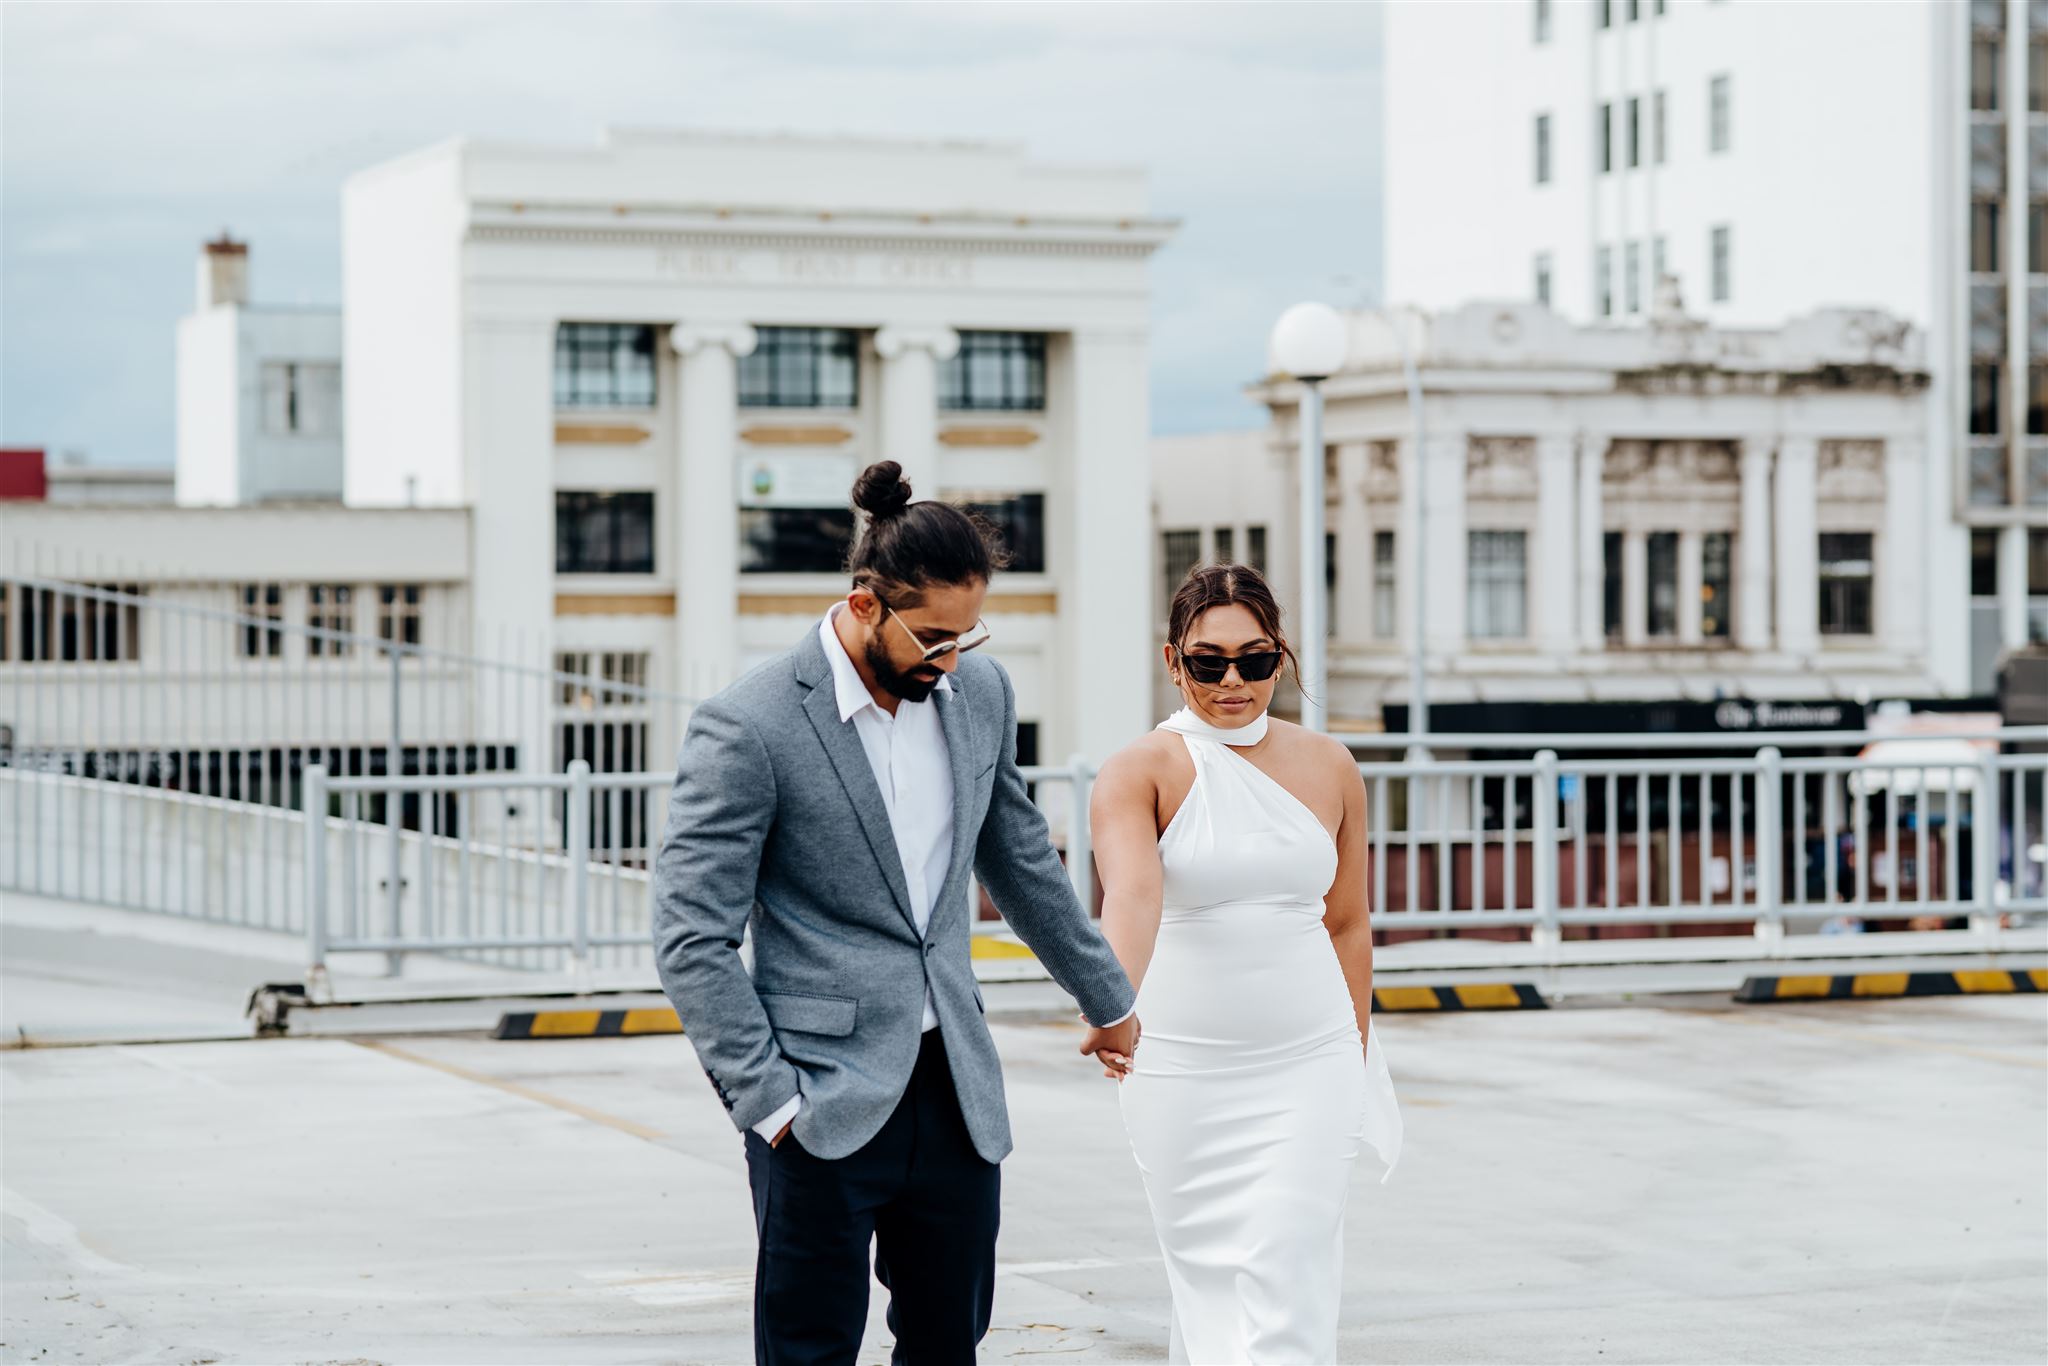 A photograph of a couple during a wedding photoshoot in Hamilton Central, Waikato, taken by Waikato and Bay of Plenty Photographer Haley Adele Photography